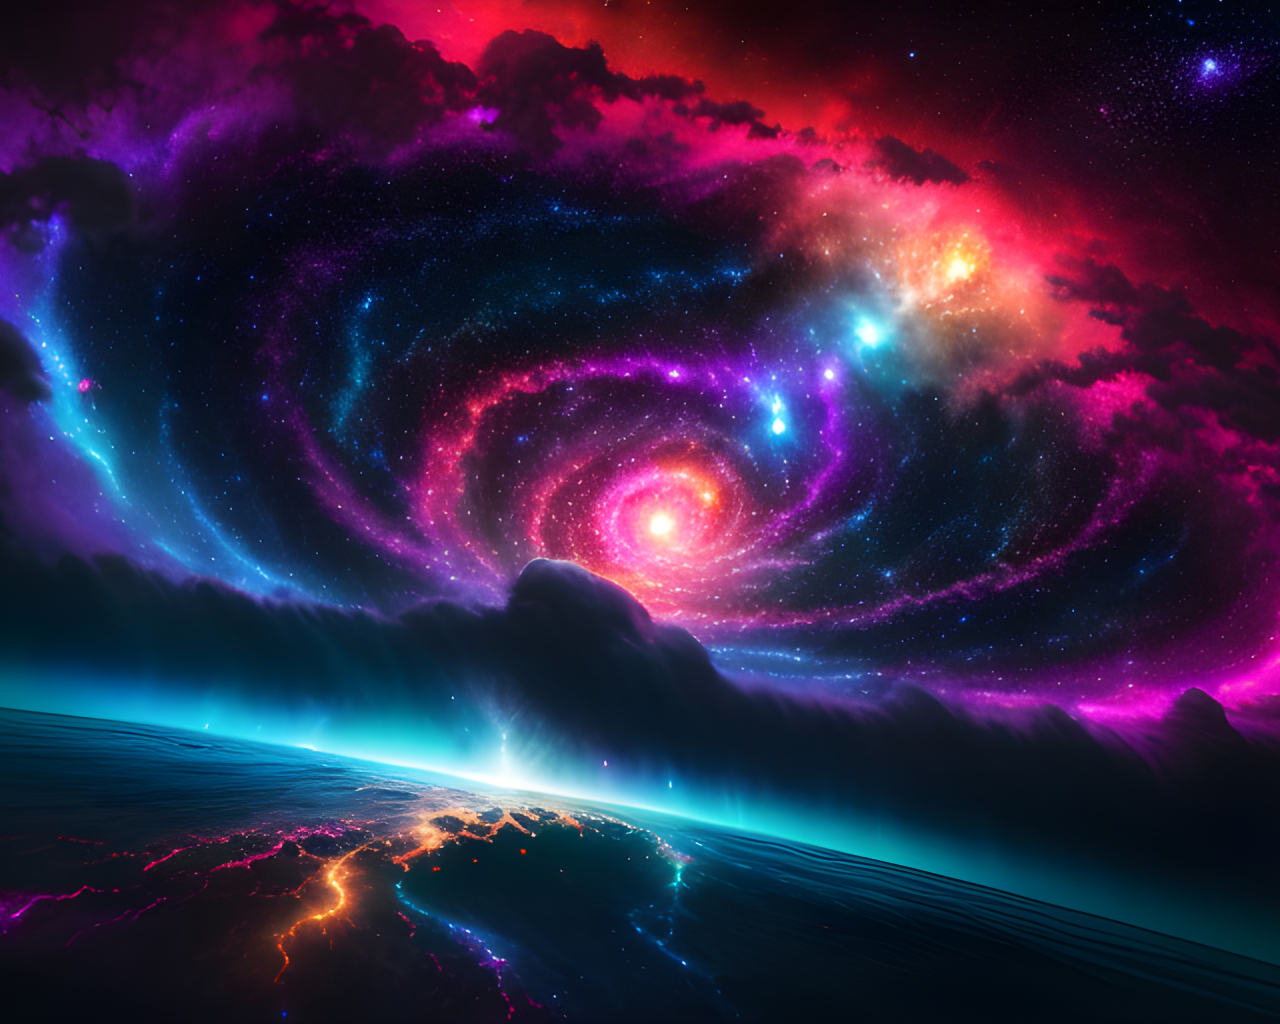 1280x1024 Resolution Amazing Outer Space 4k Galaxy 1280x1024 Resolution Wallpaper Wallpapers Den 0136